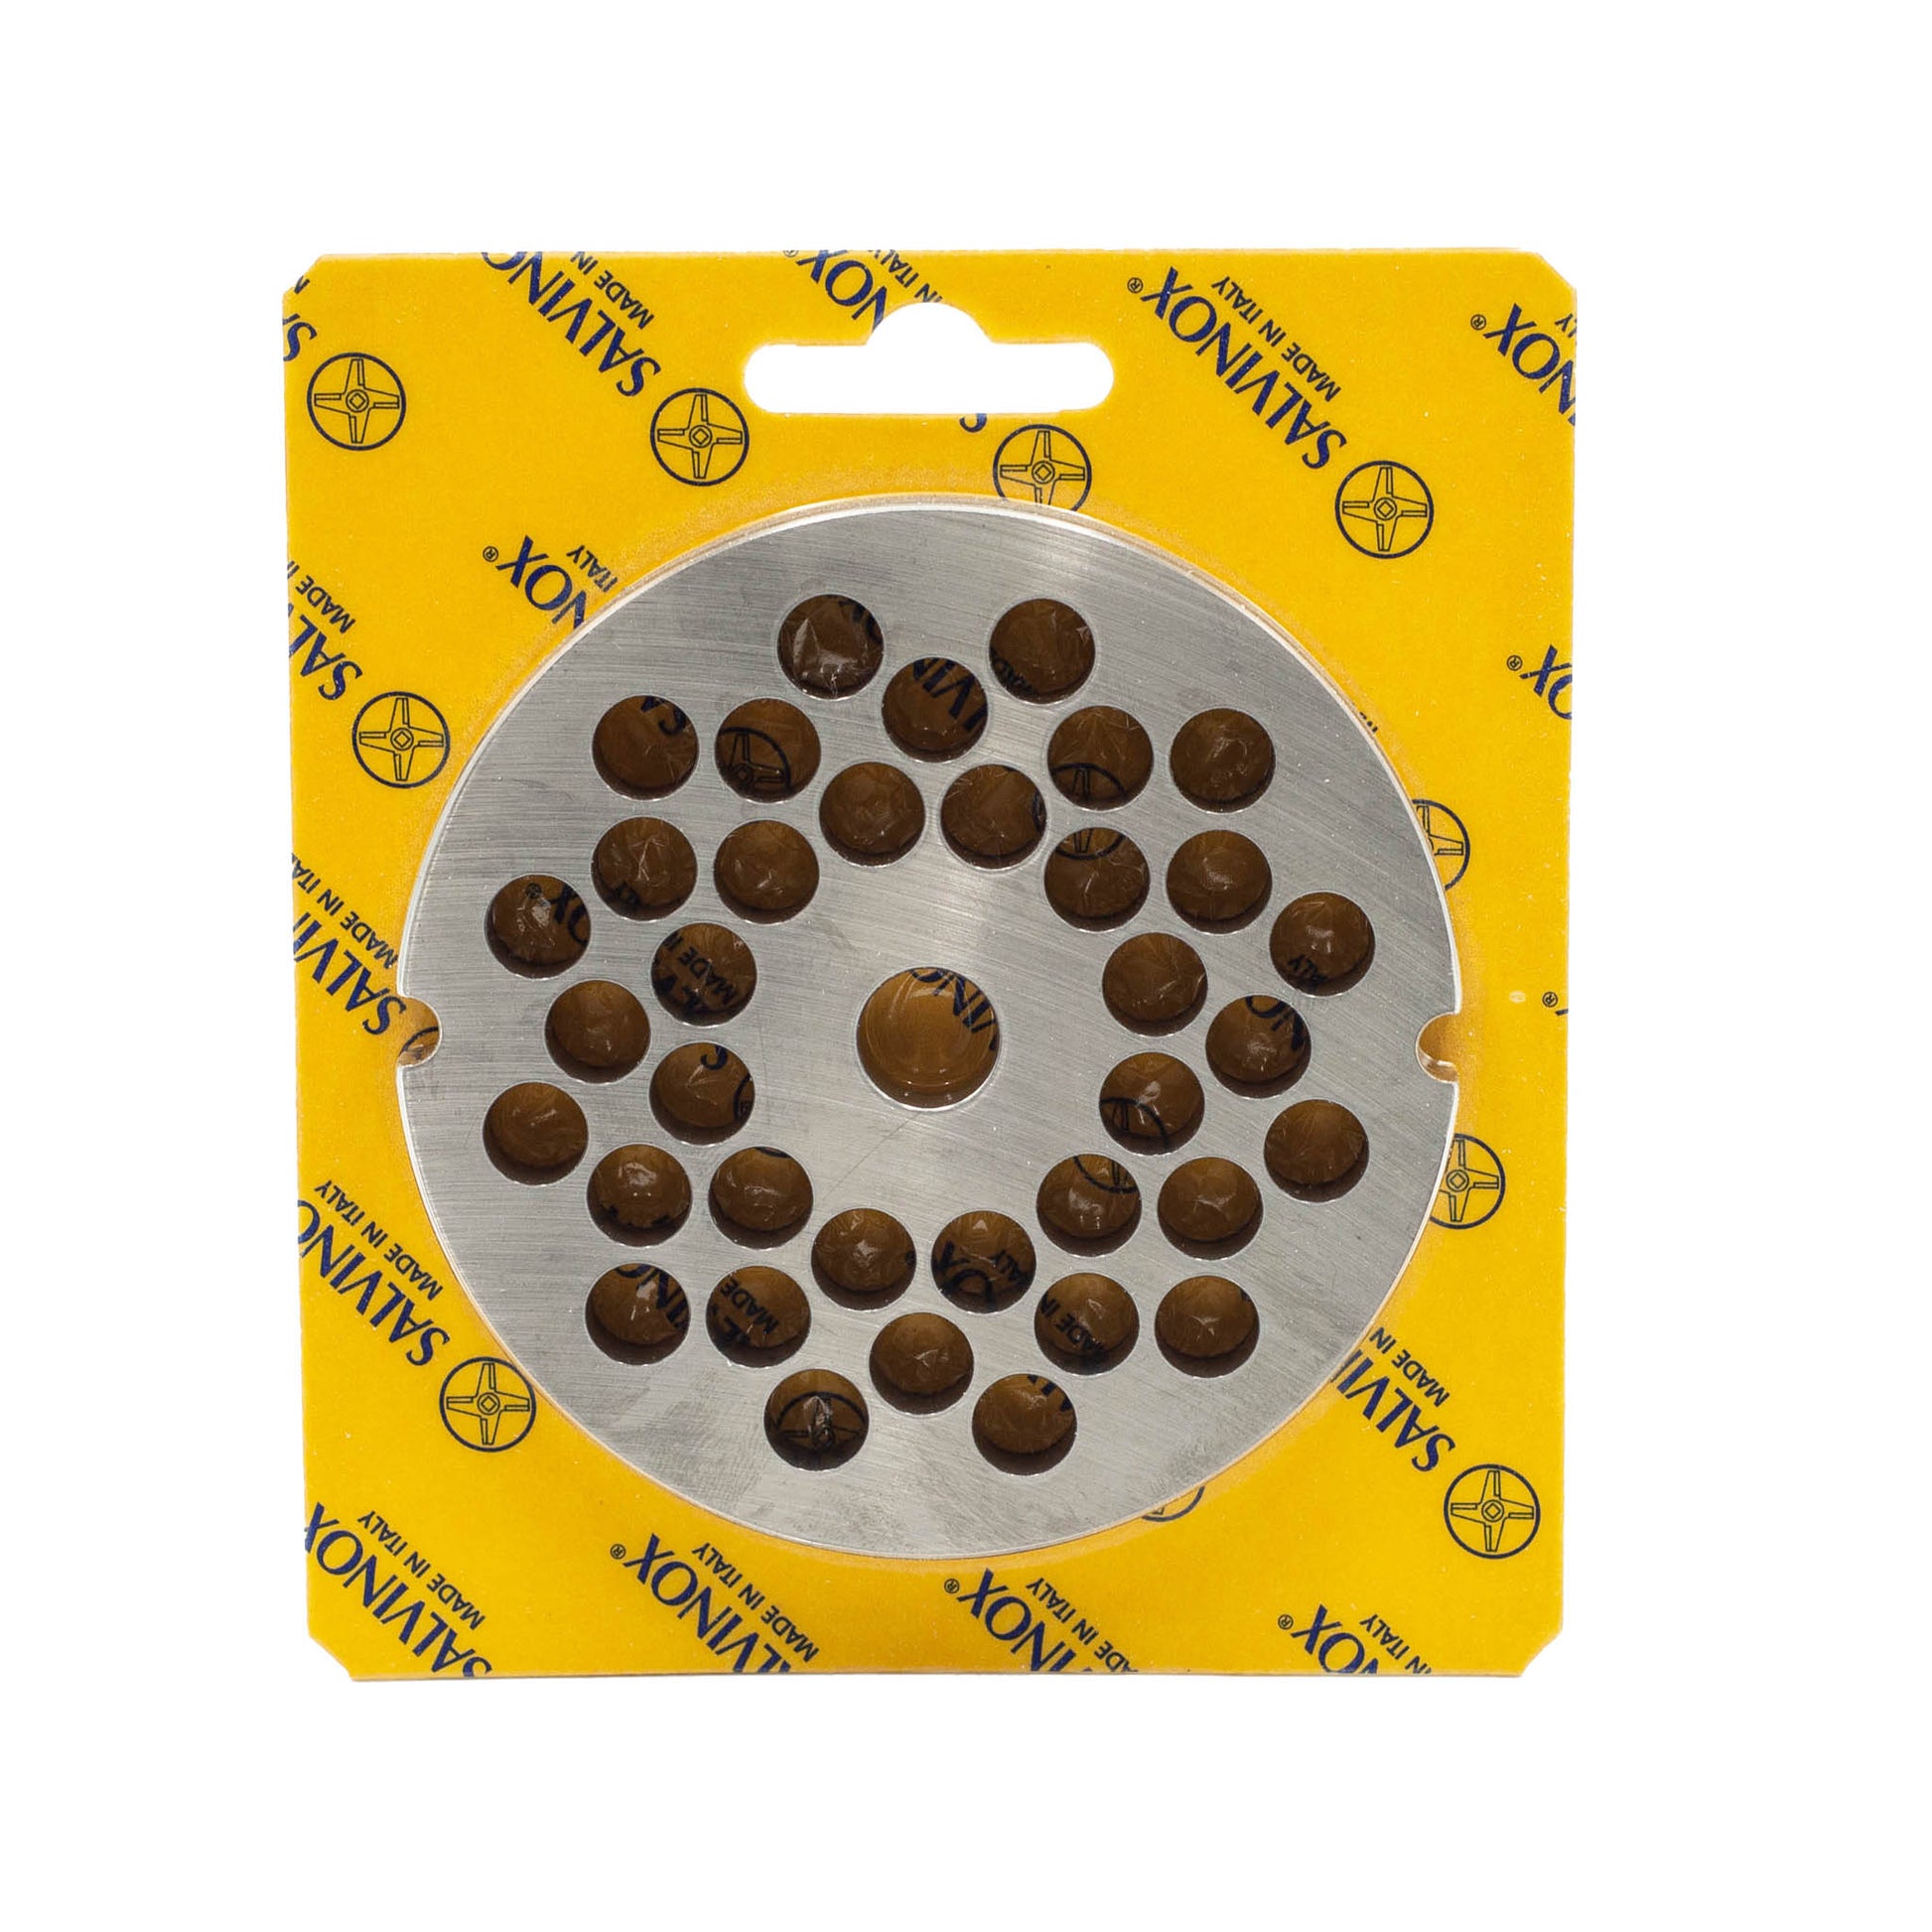 Size 32 with 10mm holes stainless steel replacement mincer plate for salami and sausage mincing machines. 